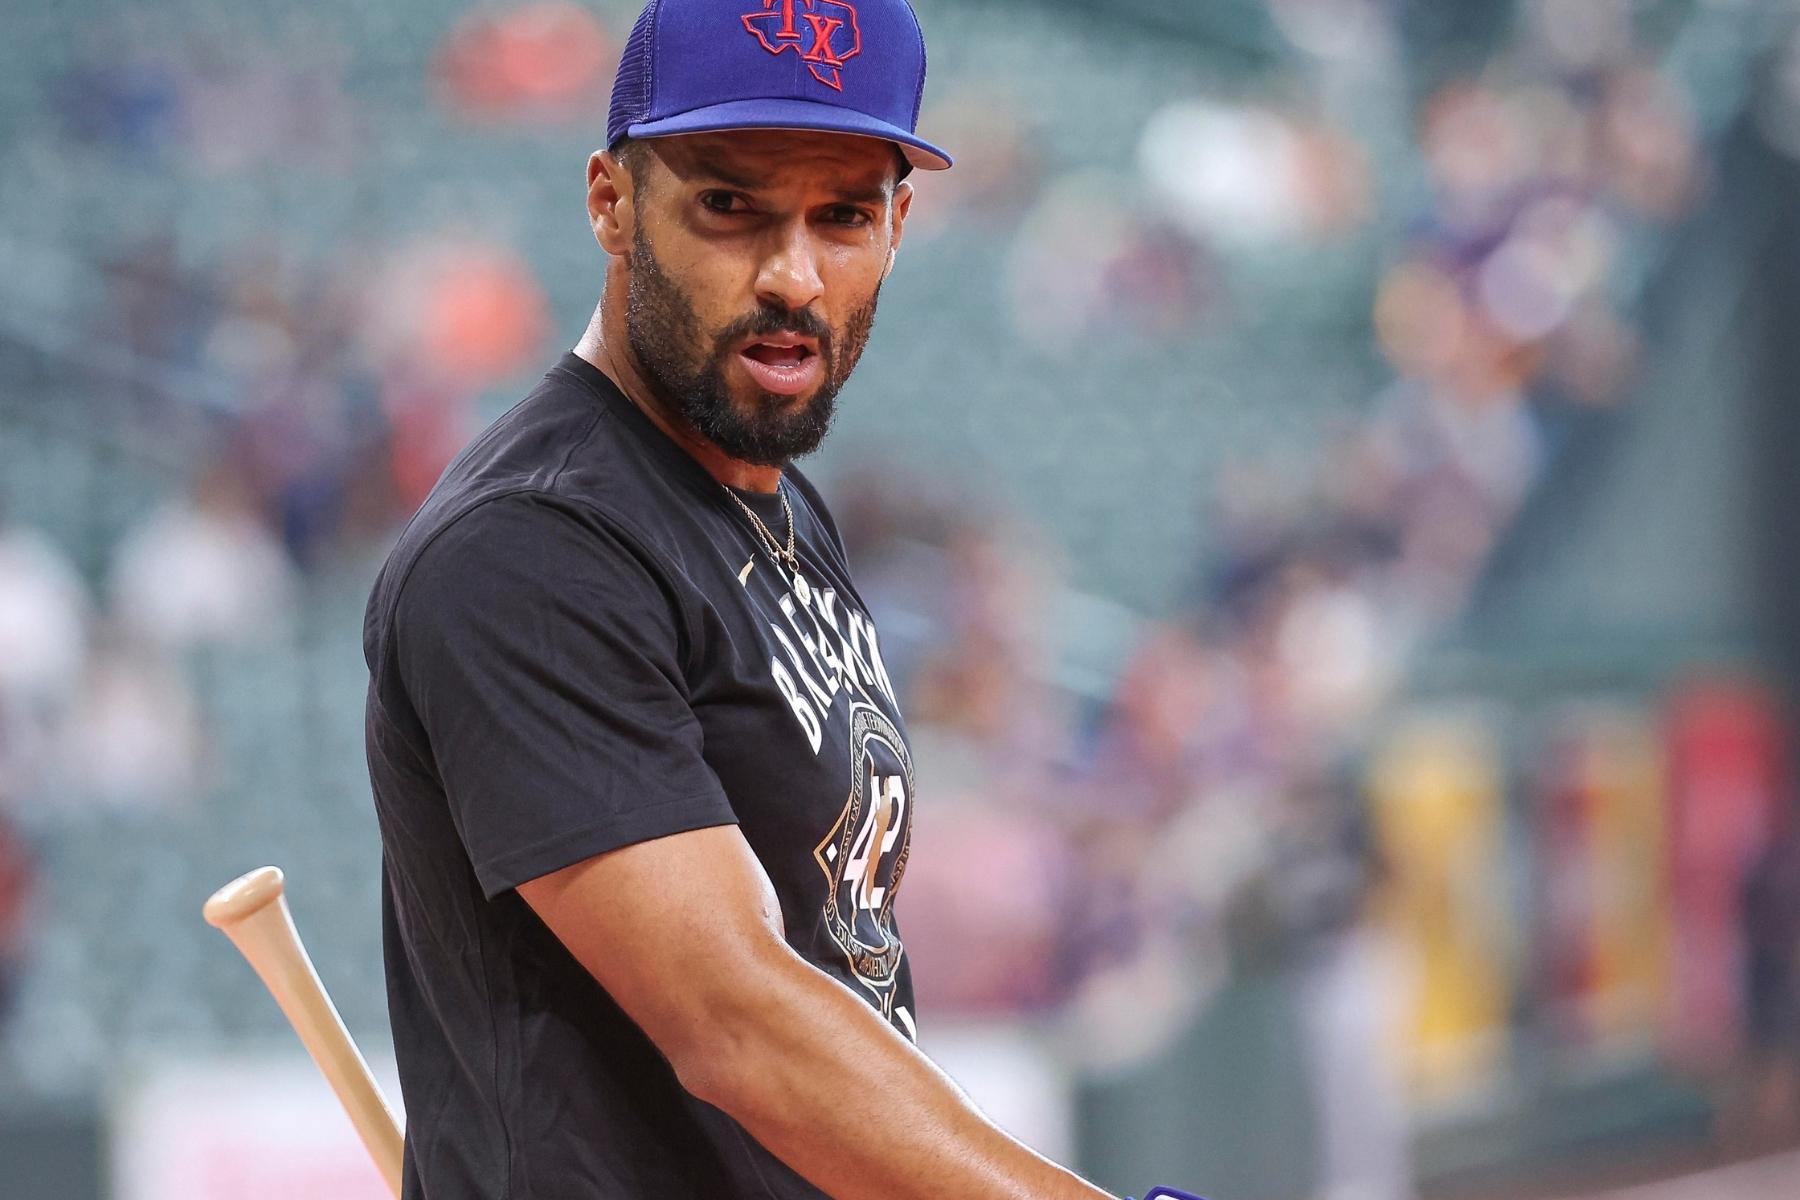 Rangers' Marcus Semien has become a true All-Star in the Lone Star